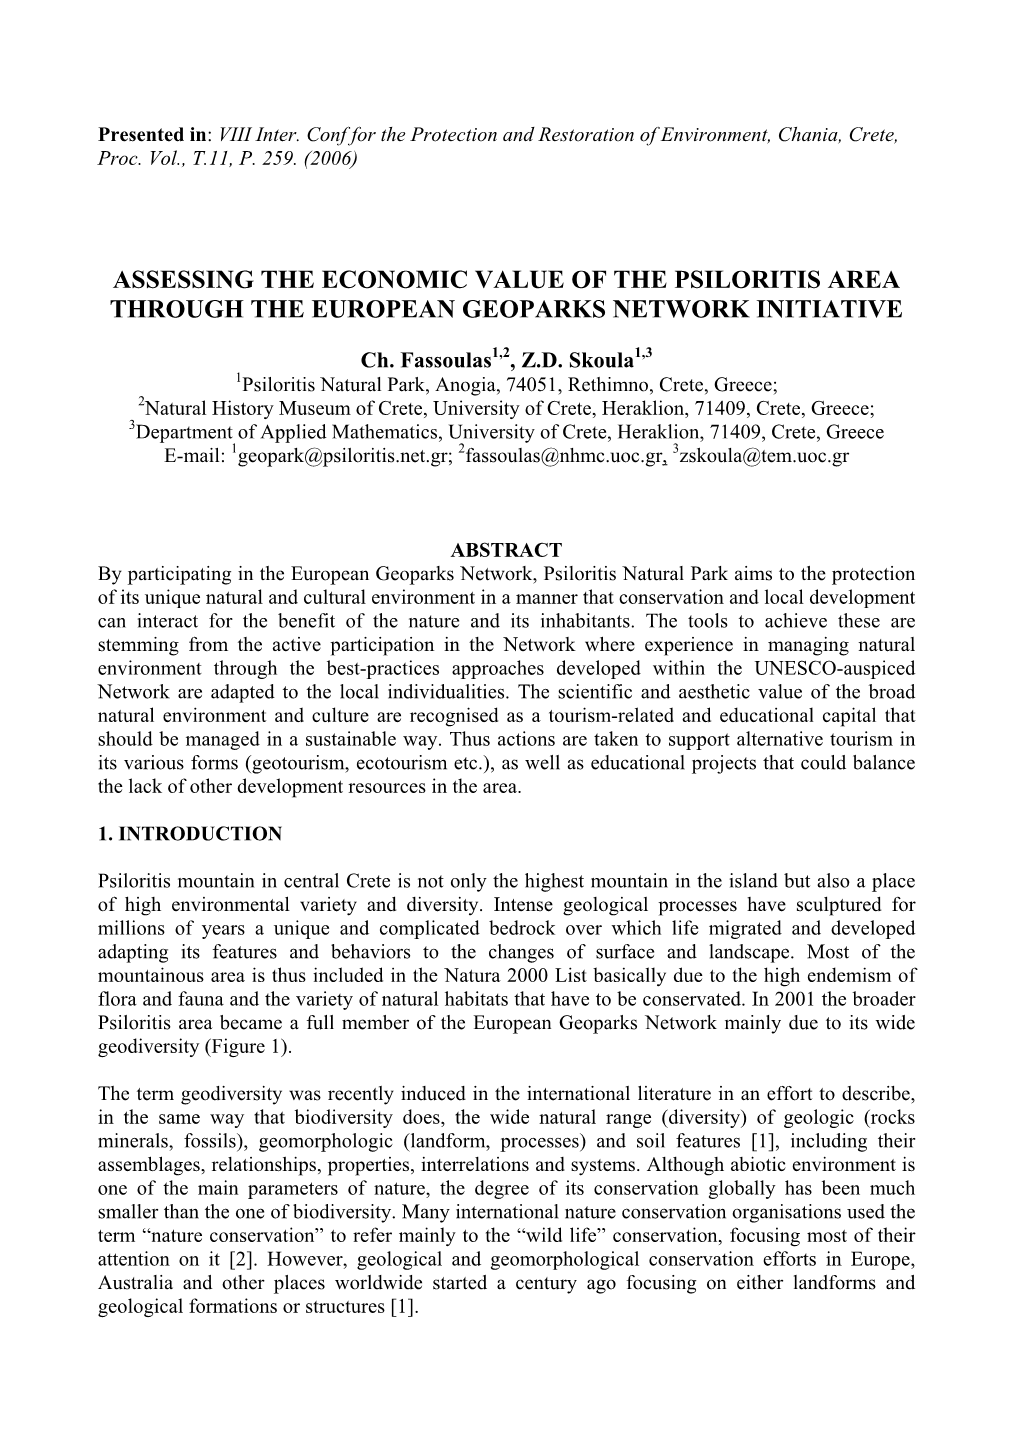 Assessing the Economic Value of the Psiloritis Area Through the European Geoparks Network Initiative